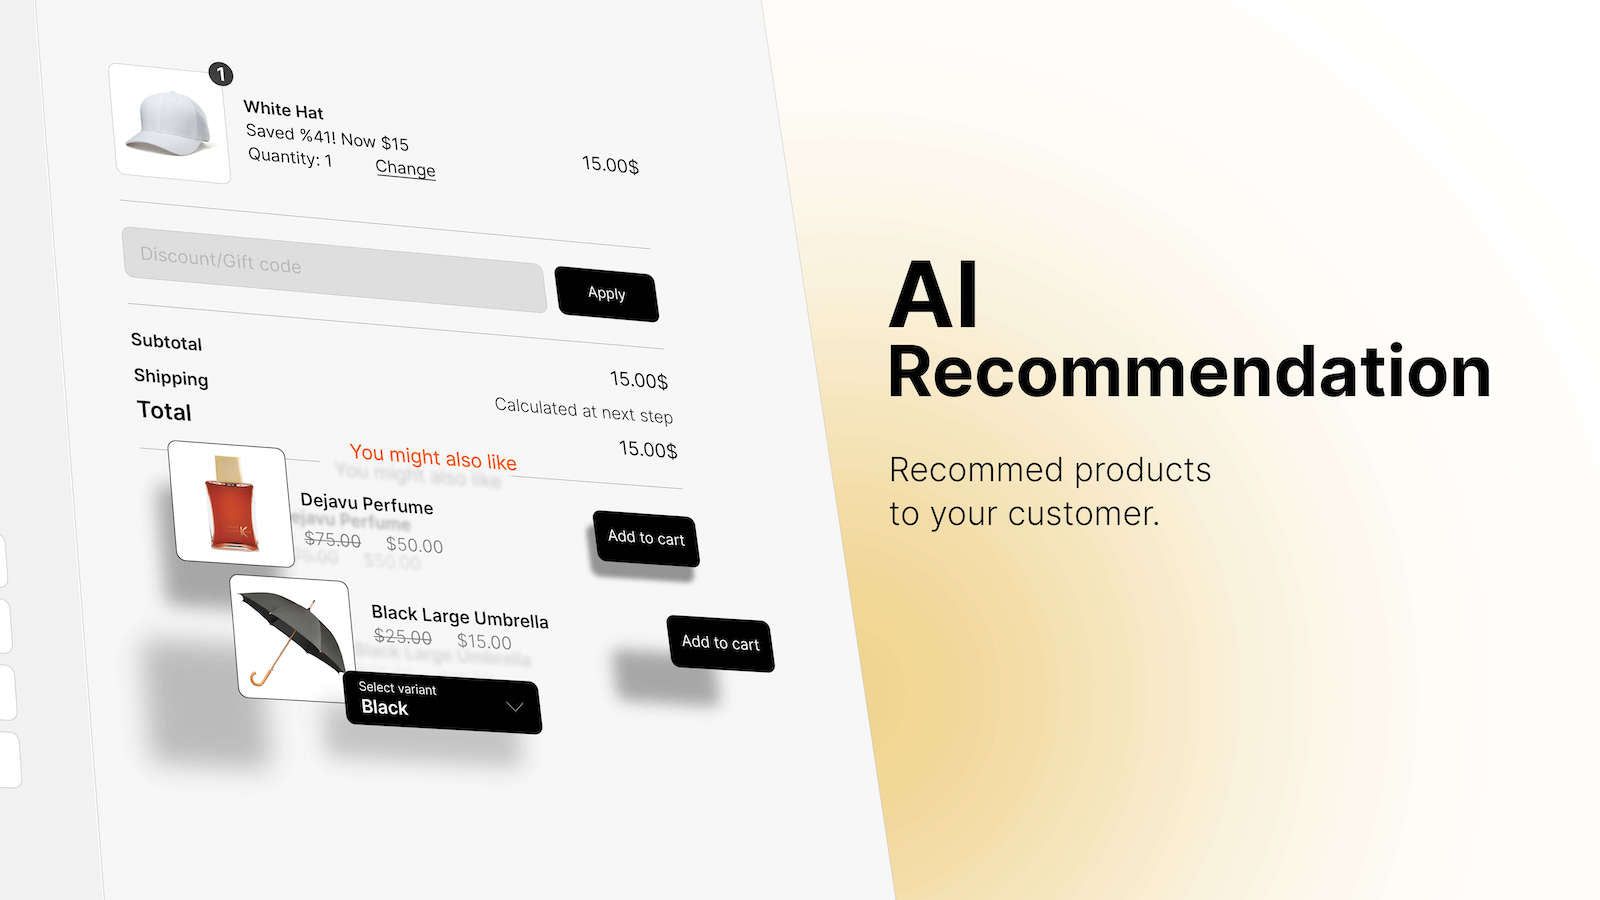 Product recommendations with AI and powerful algorithm